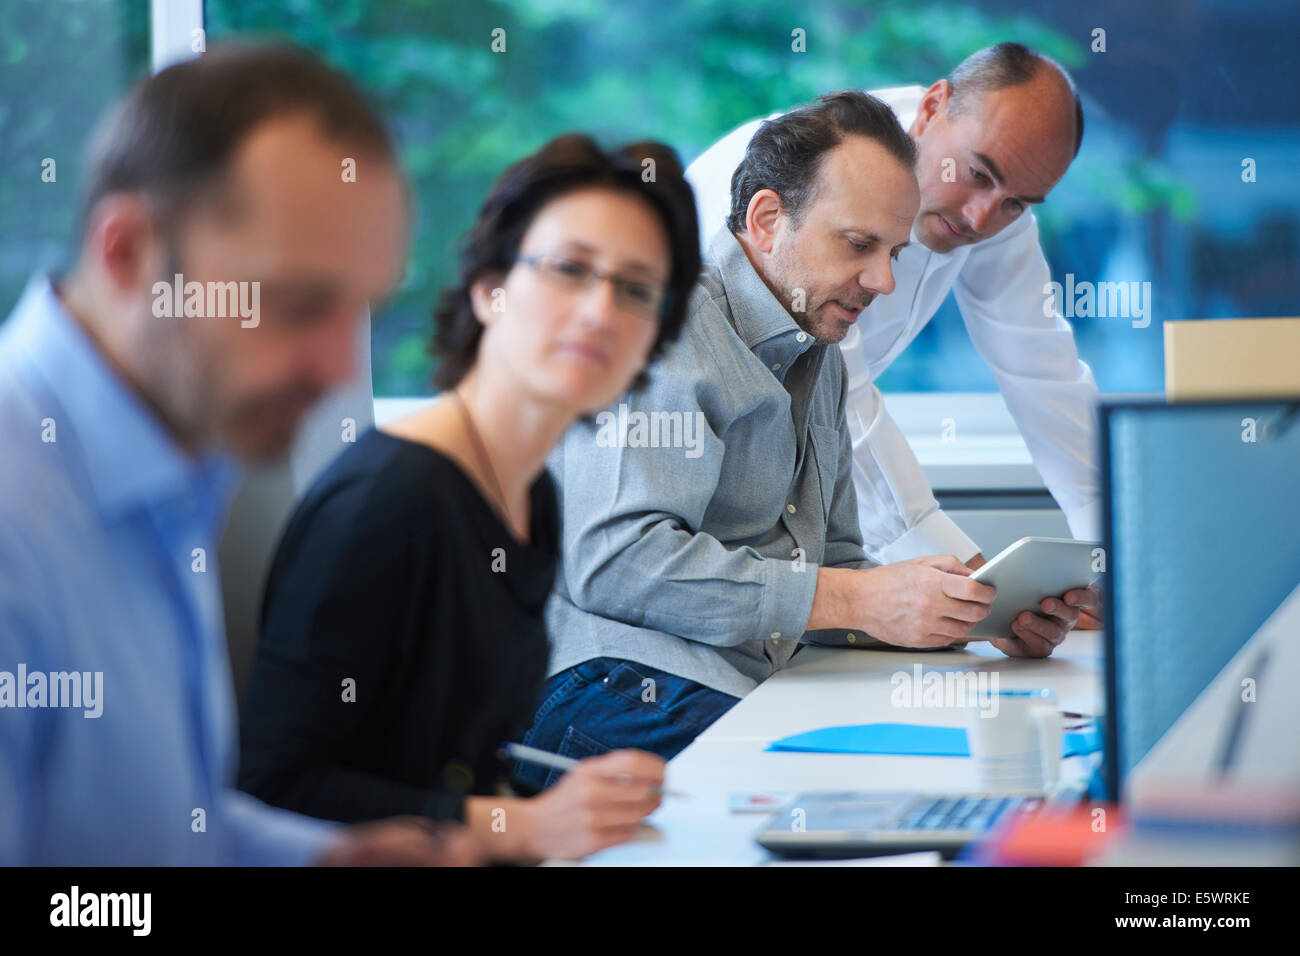 Businesspeople working in office Stock Photo